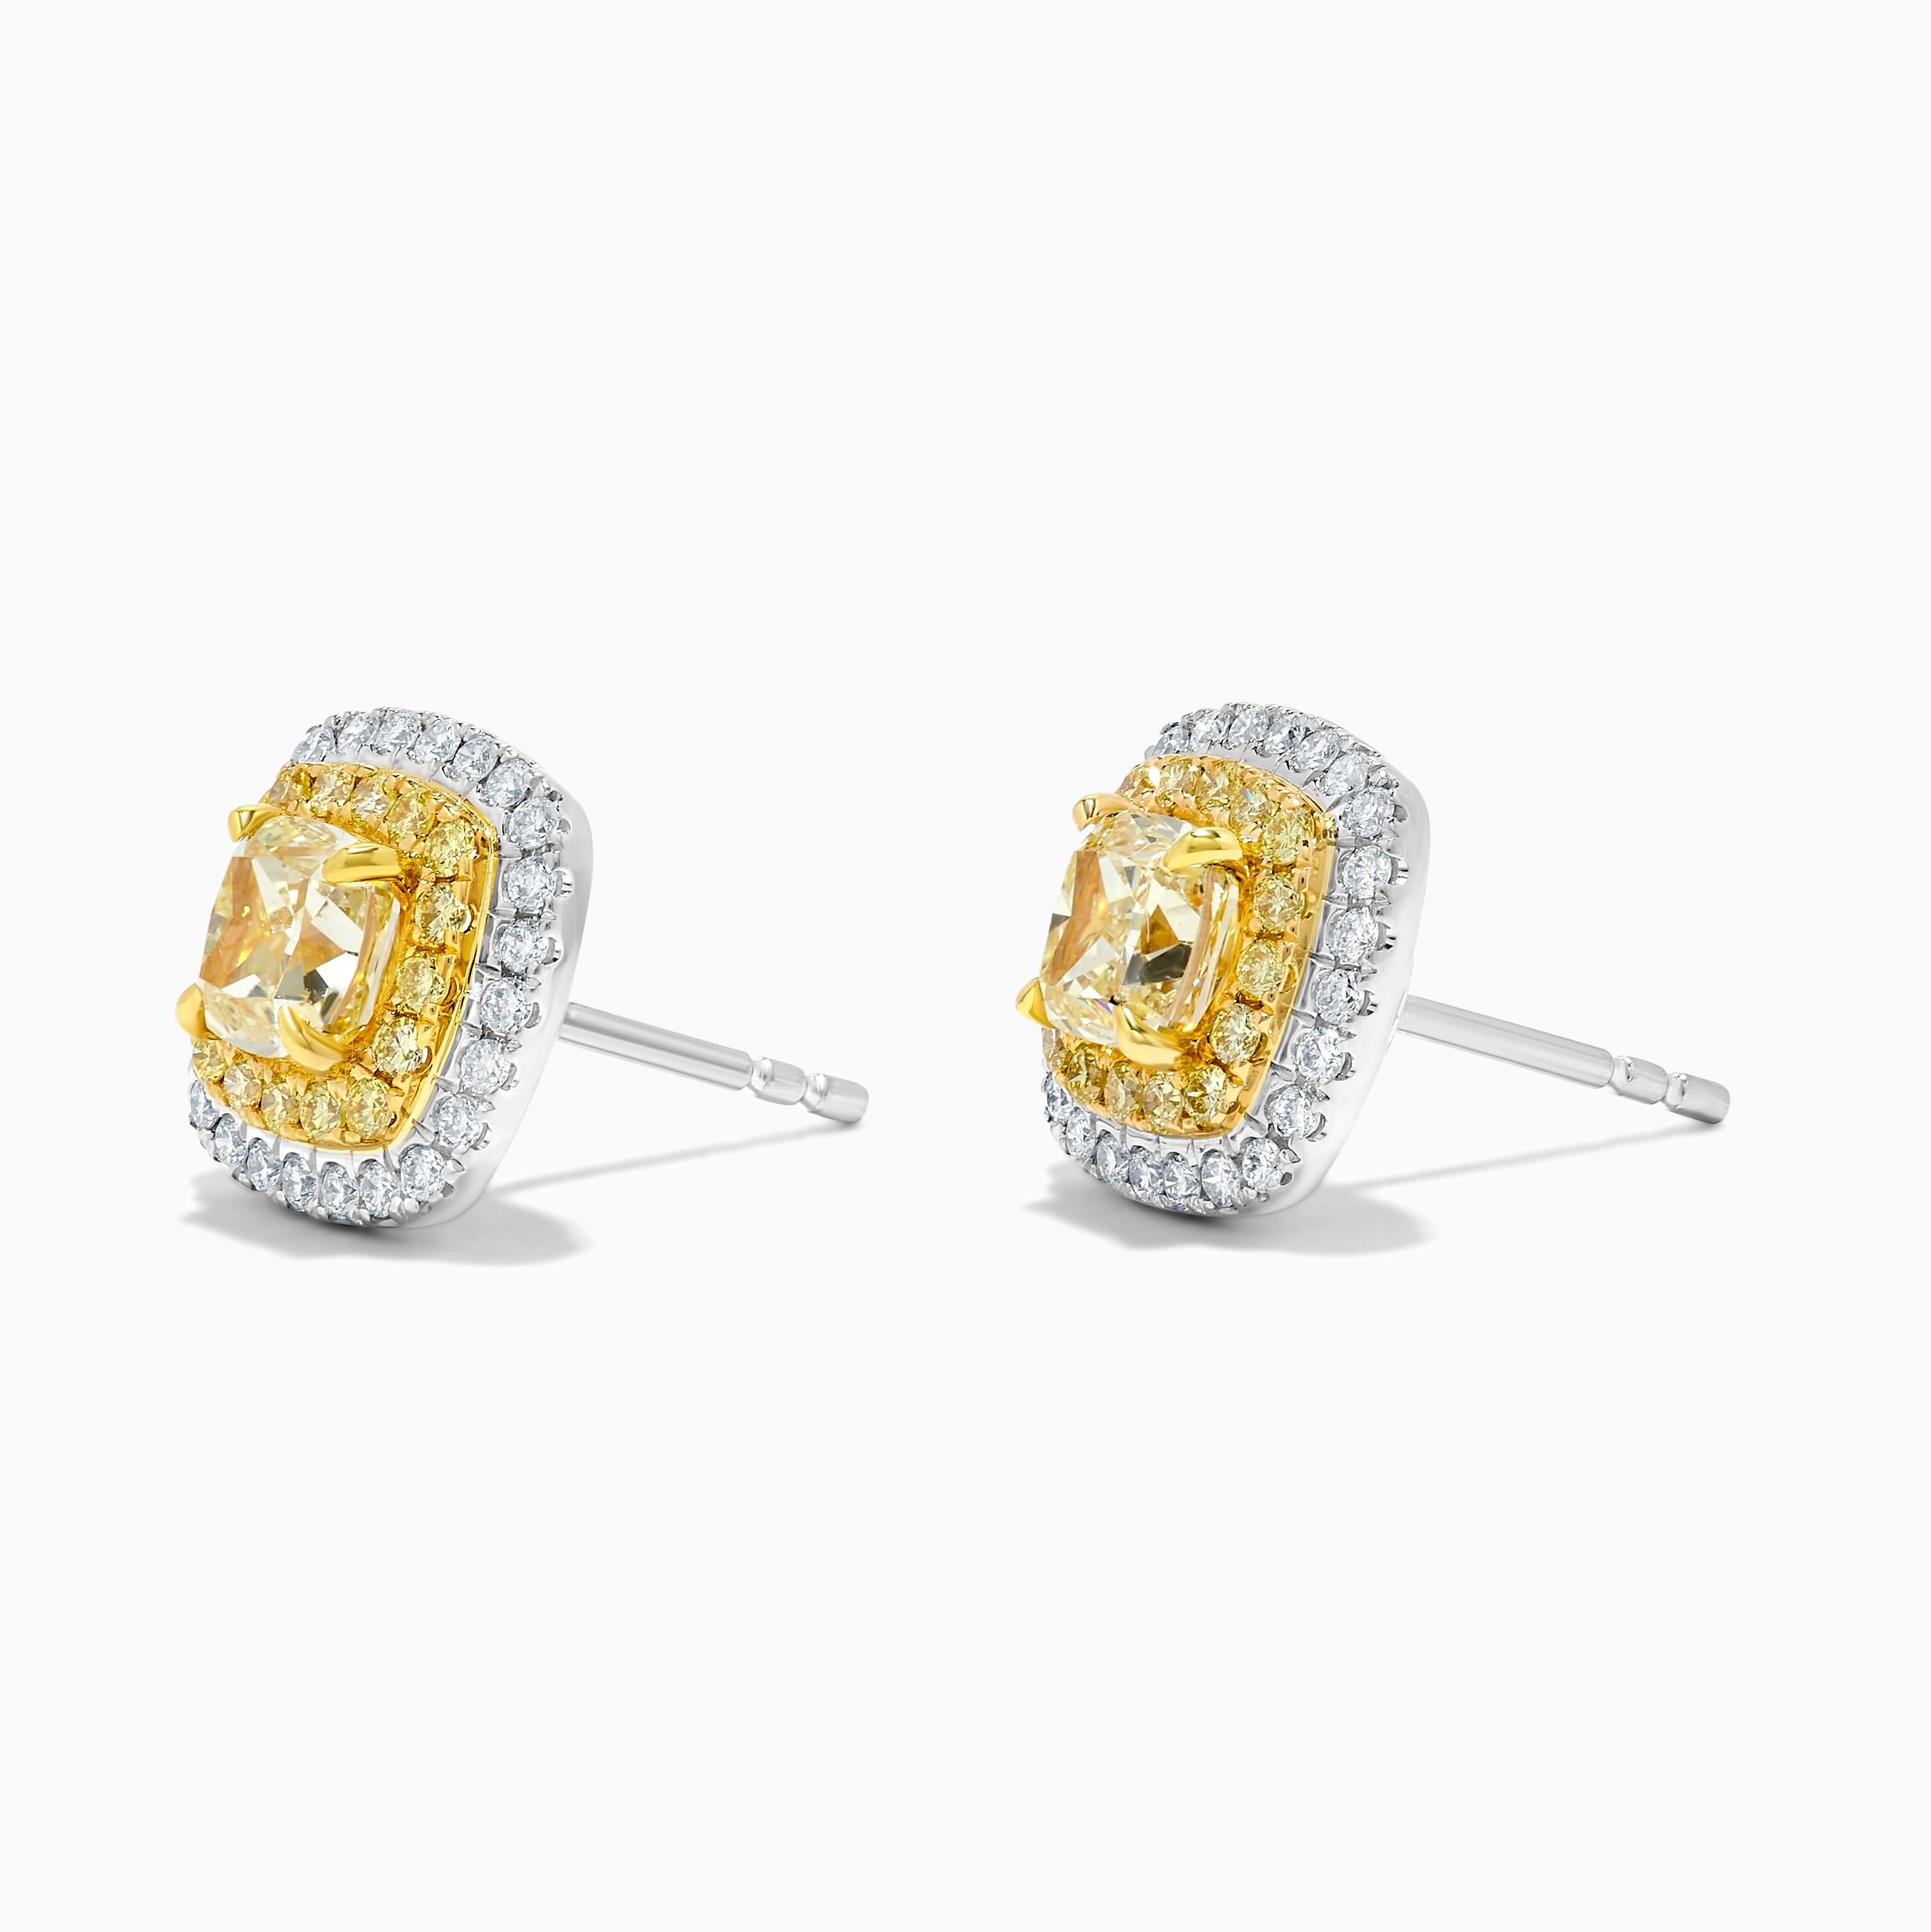 Natural Yellow Cushion Diamond 2.10 Carat TW Gold Stud Earrings In New Condition For Sale In New York, NY